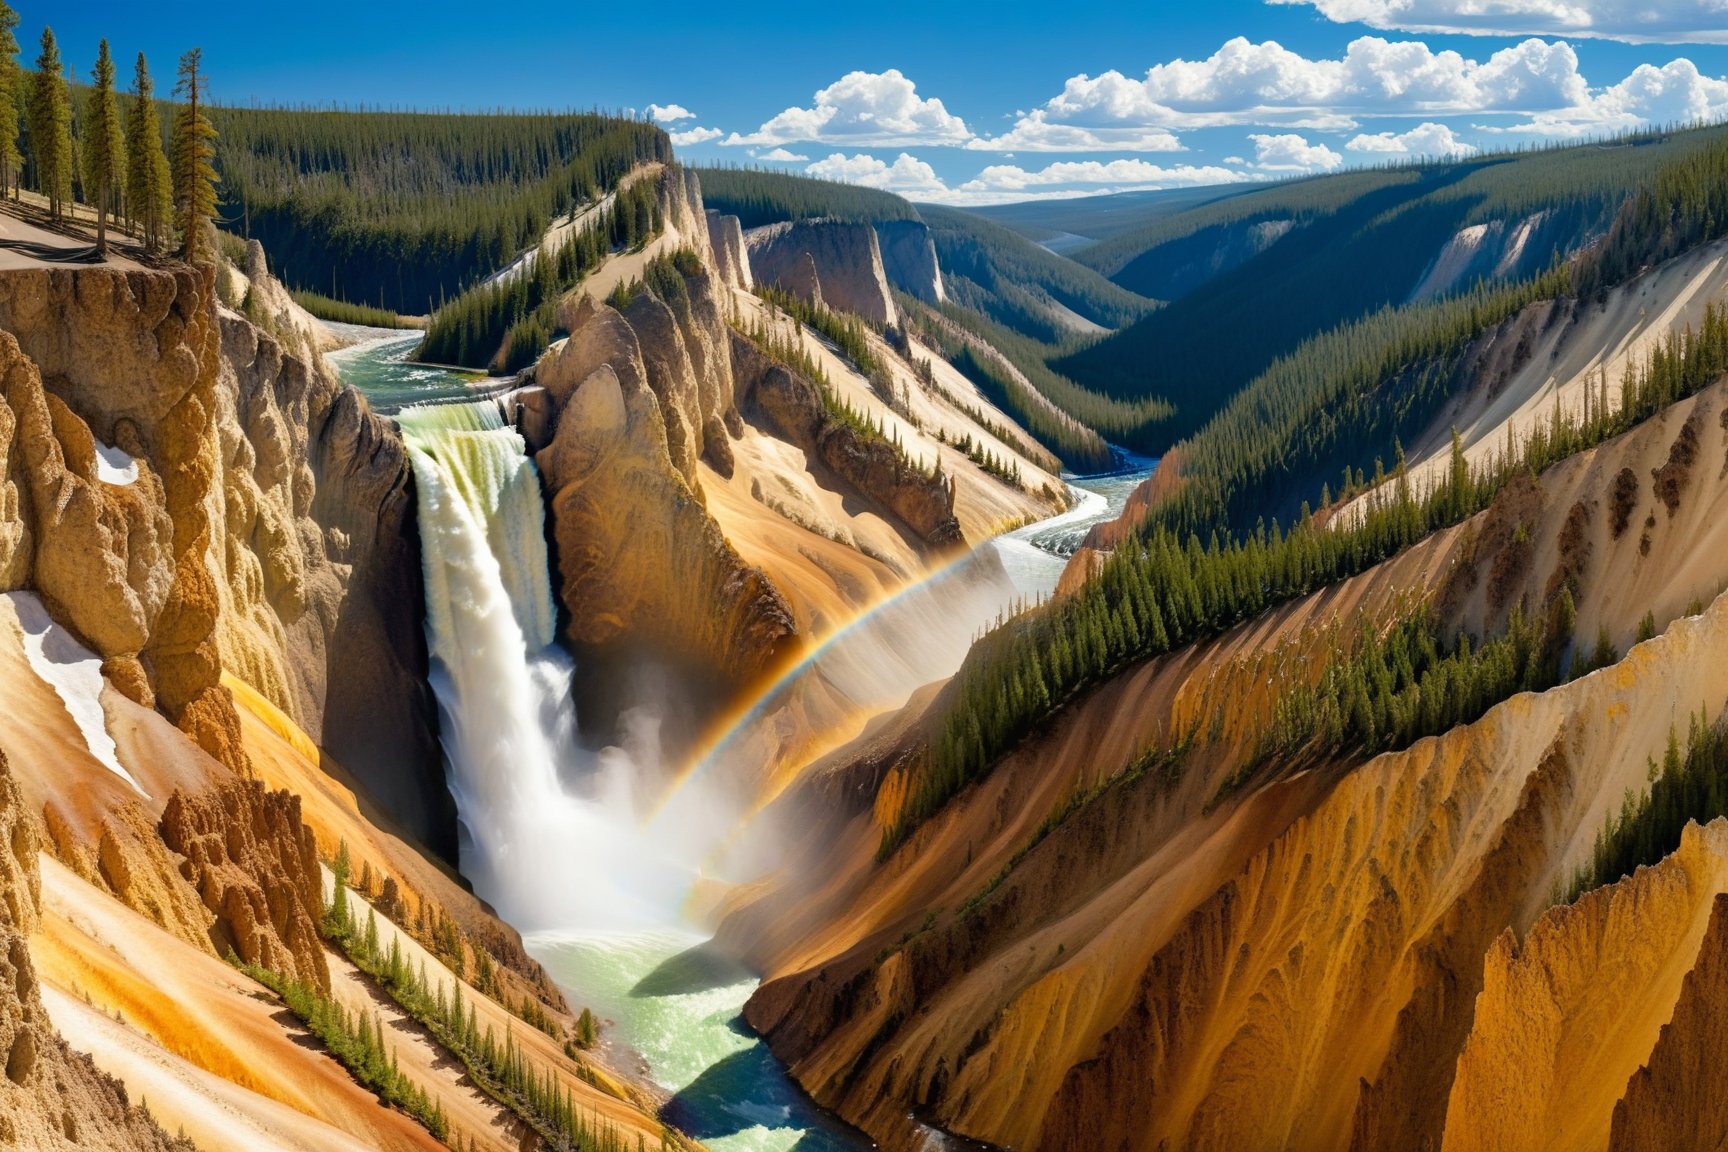 ((Hyper-Realistic)) detailed scene of Artist Point \(art1stp0int\) in Yellowstone,waterfall,tree,rock,forest, mountain,landscape,scenery,nature,water,day
BREAK 
aesthetic,rule of thirds,depth of perspective,perfect composition,studio photo,trending on artstation,cinematic lighting,(Hyper-realistic photography,masterpiece, photorealistic,ultra-detailed,intricate details,16K,sharp focus,high contrast,kodachrome 800,HDR:1.2),photo_b00ster,real_booster,ye11owst0ne,(art1stp0int:1.2),more detail XL